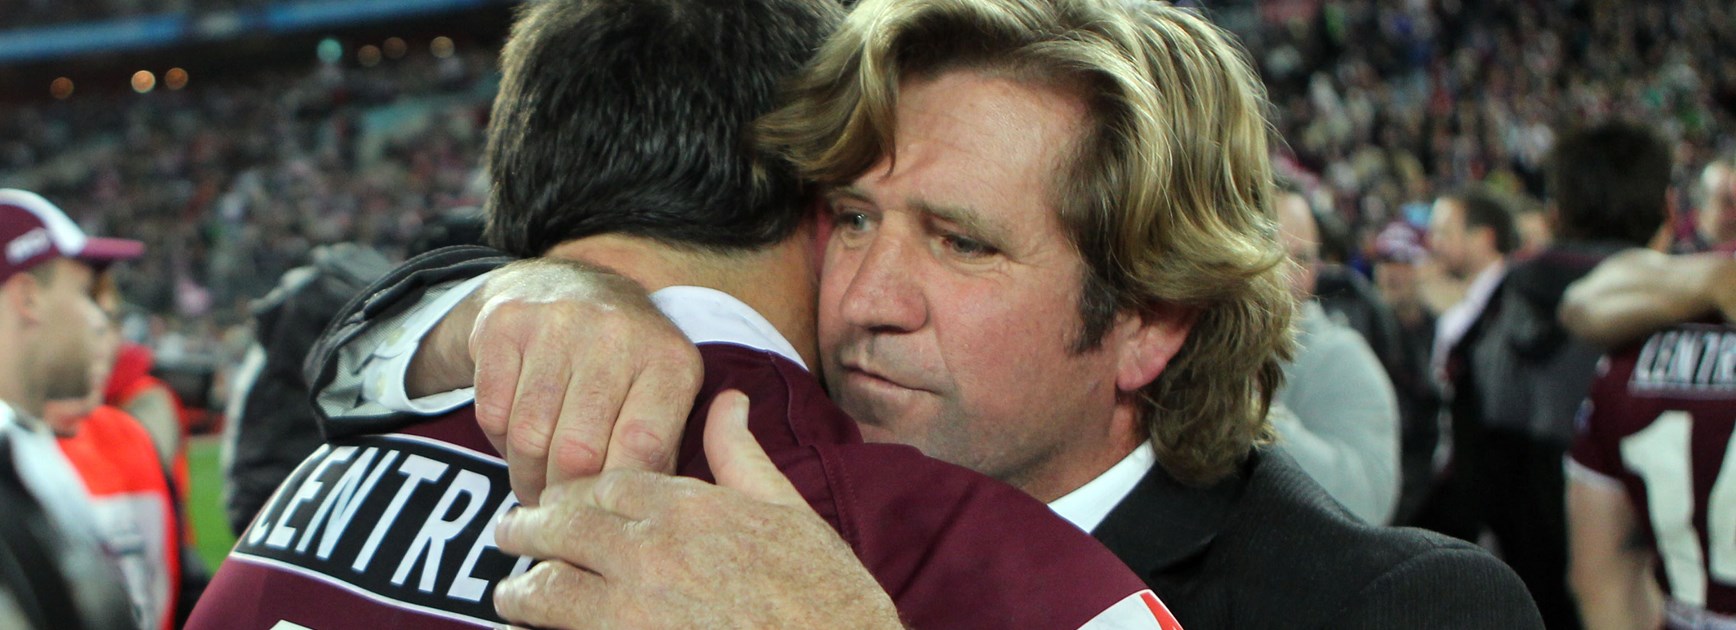 Why Manly should get Hasler or Toovey back if Barrett walks